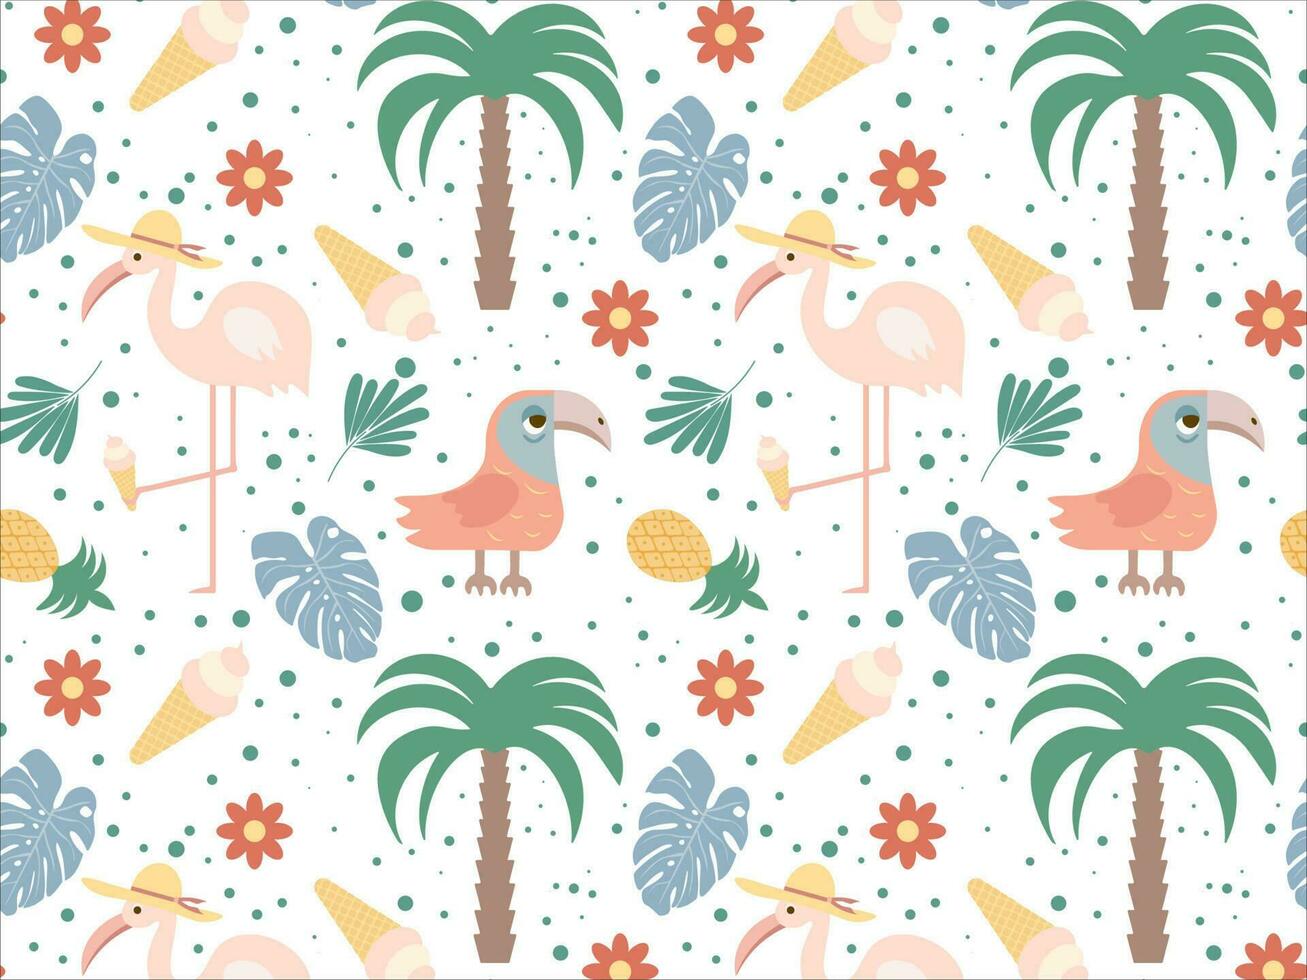 Seamless pattern with the image of a flamingo and a parrot. Cute pattern with cartoon characters and objects on a white background. Vector illustration.